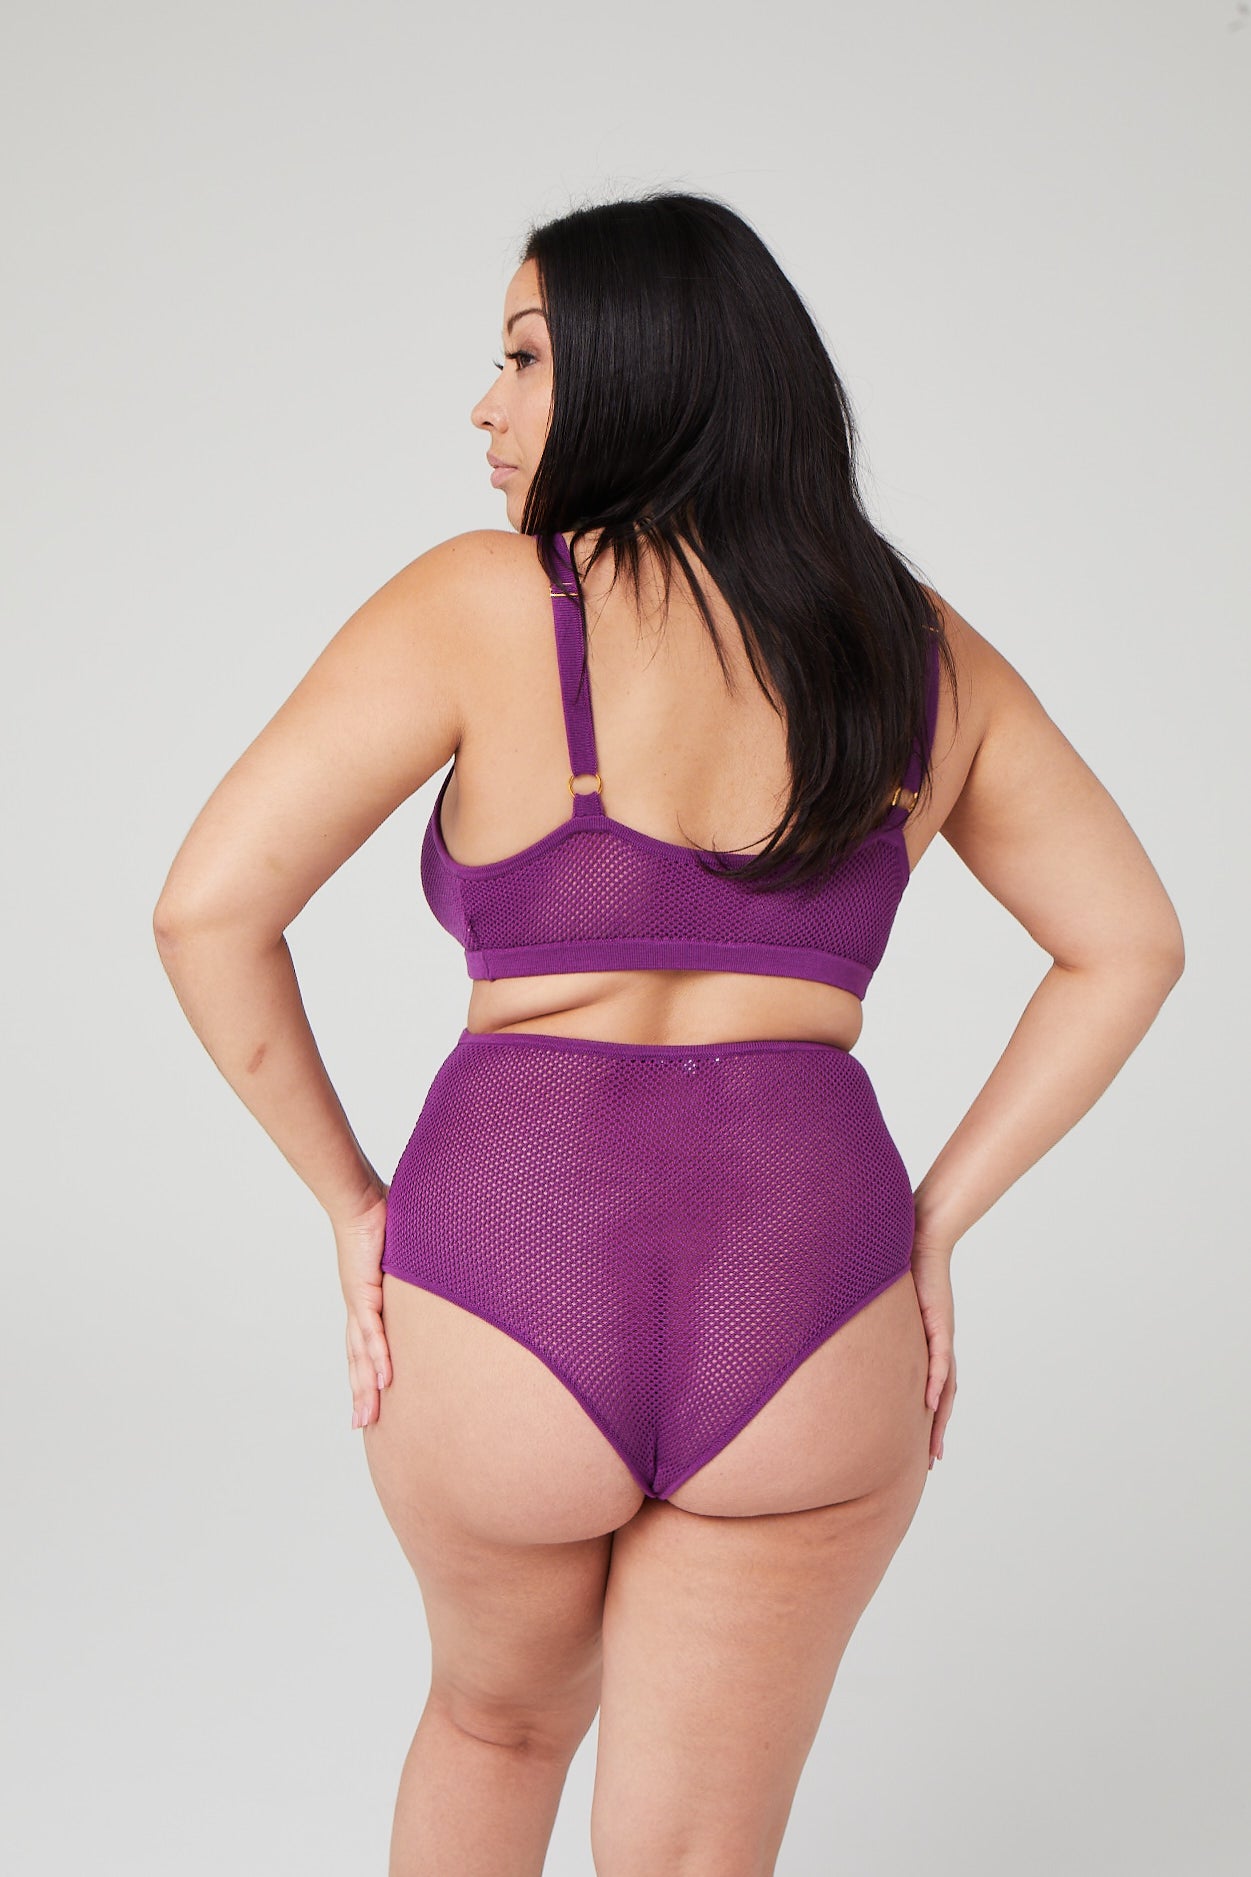 sustainable high waisted panties in purple mesh knit